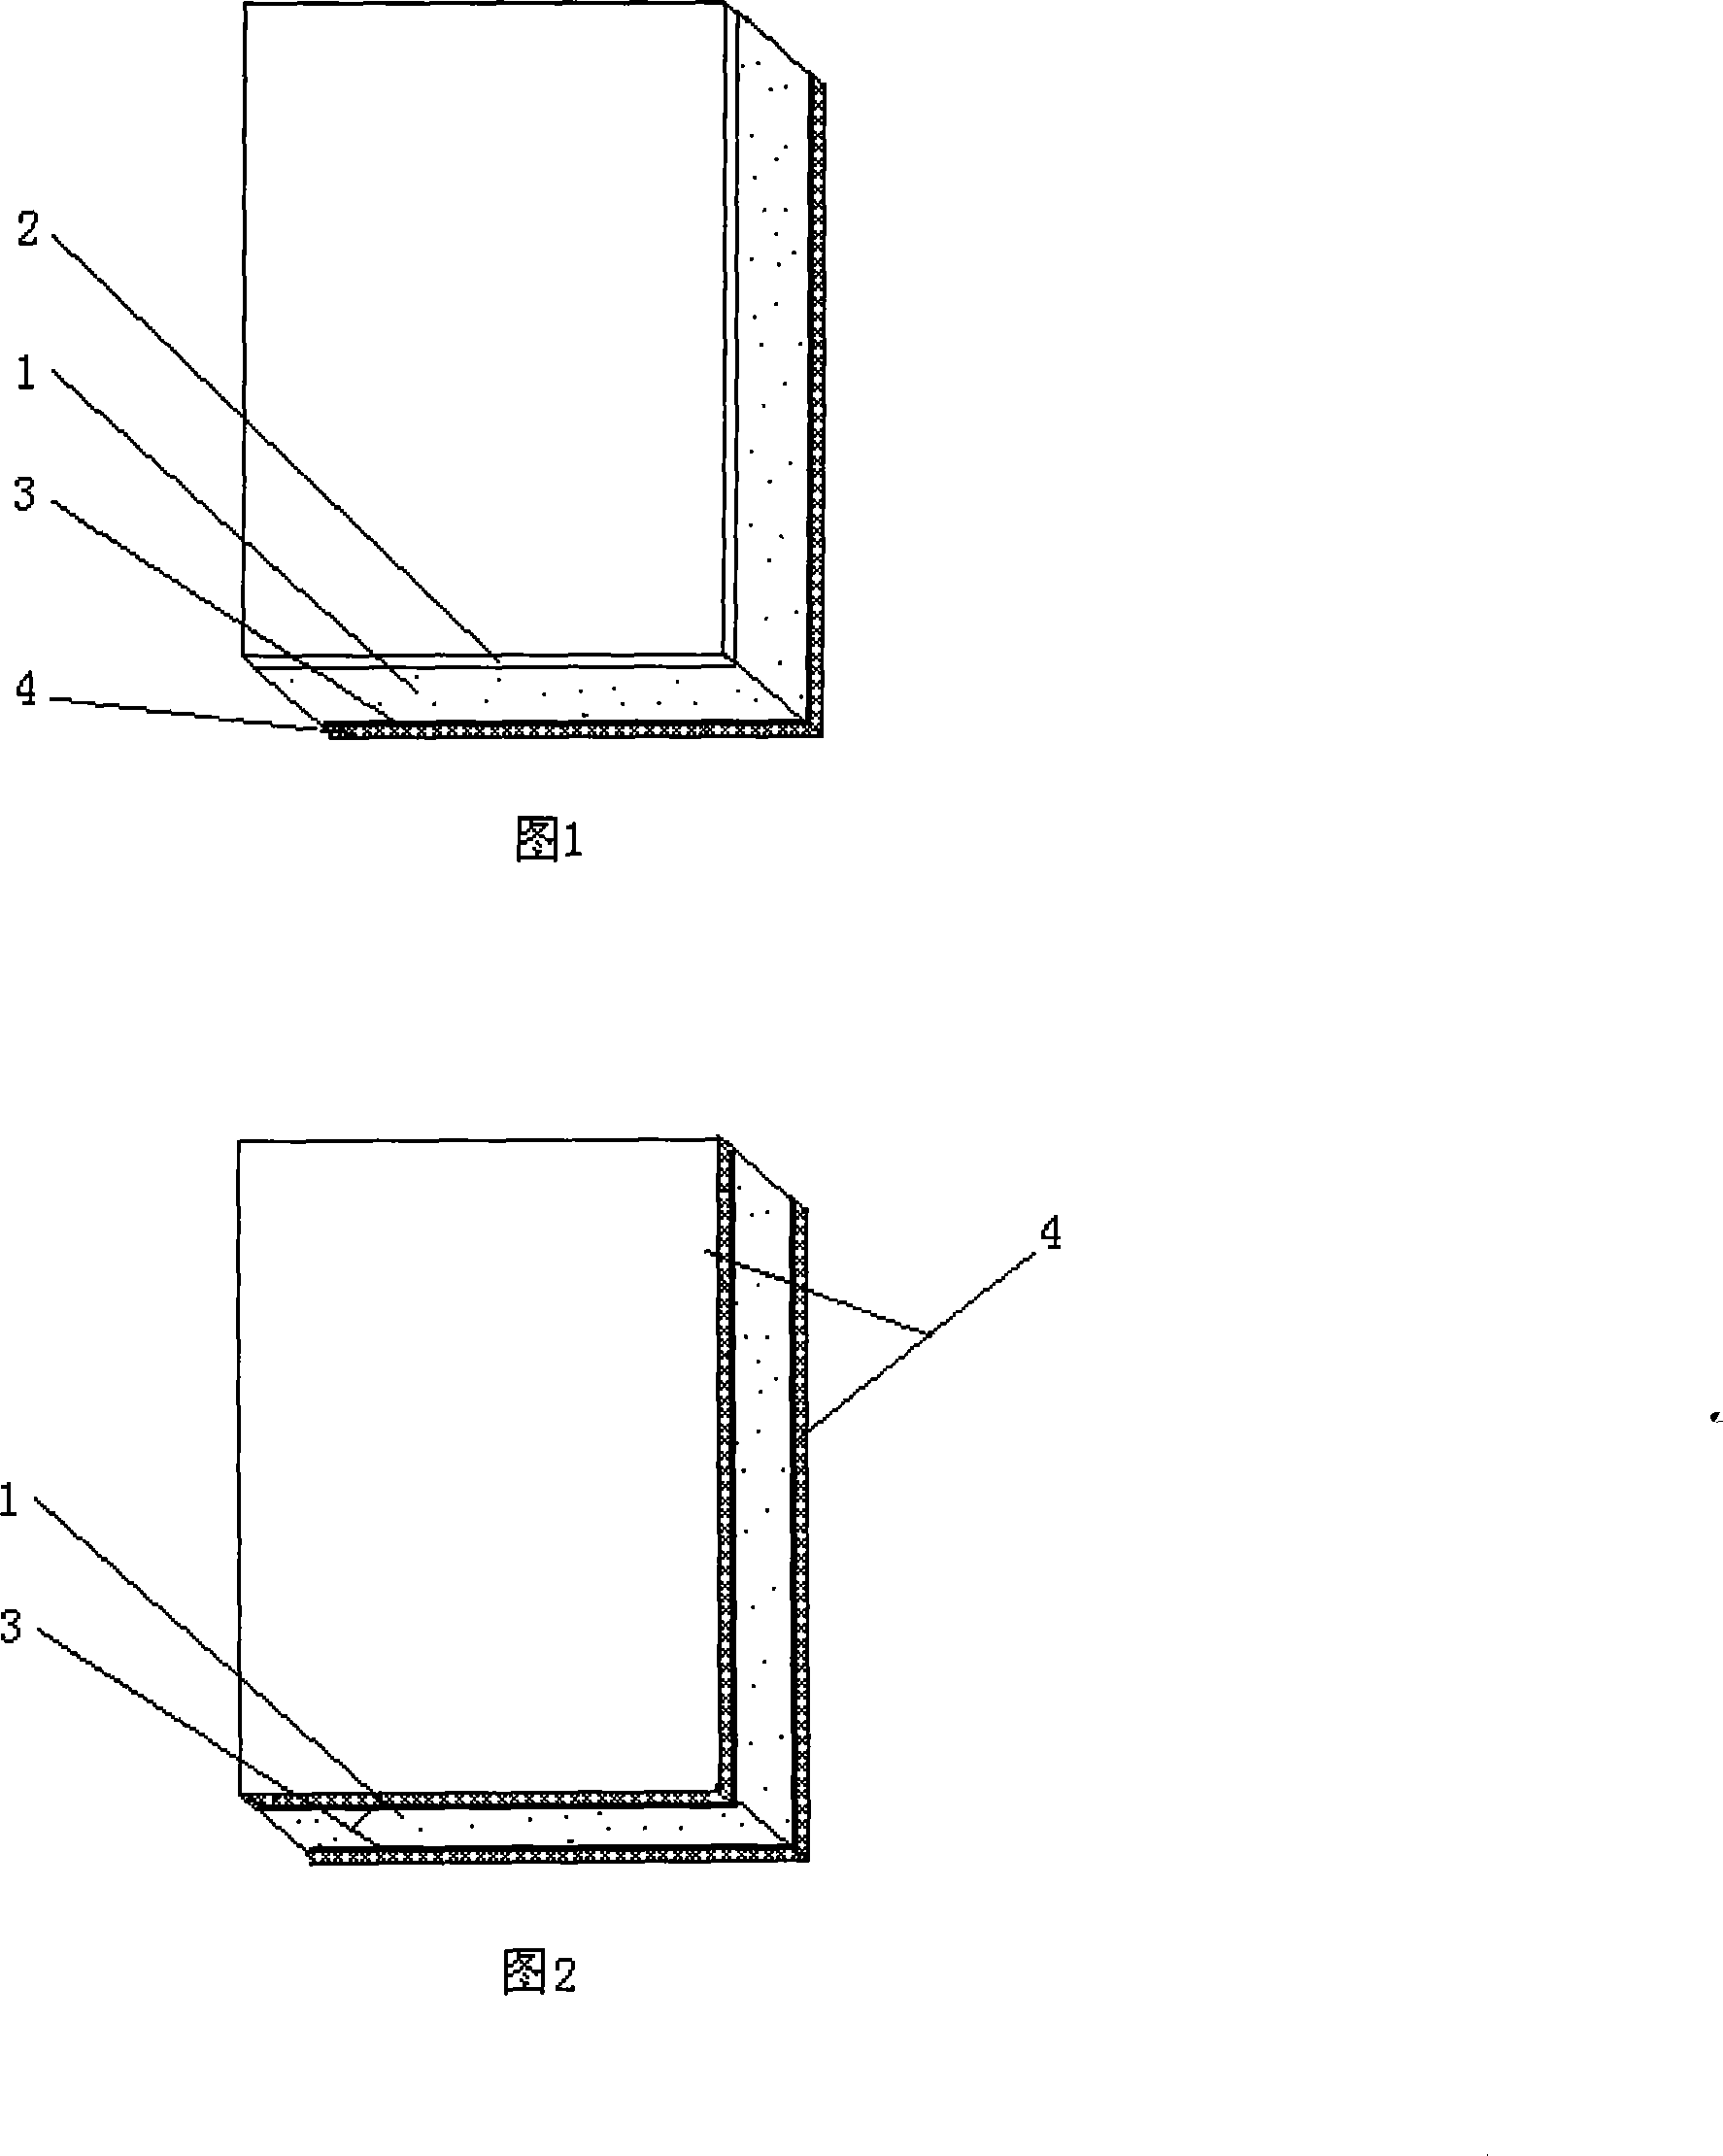 Polyurethane water-proof easy-to-paste heat-preserving composite board and method for producing the same